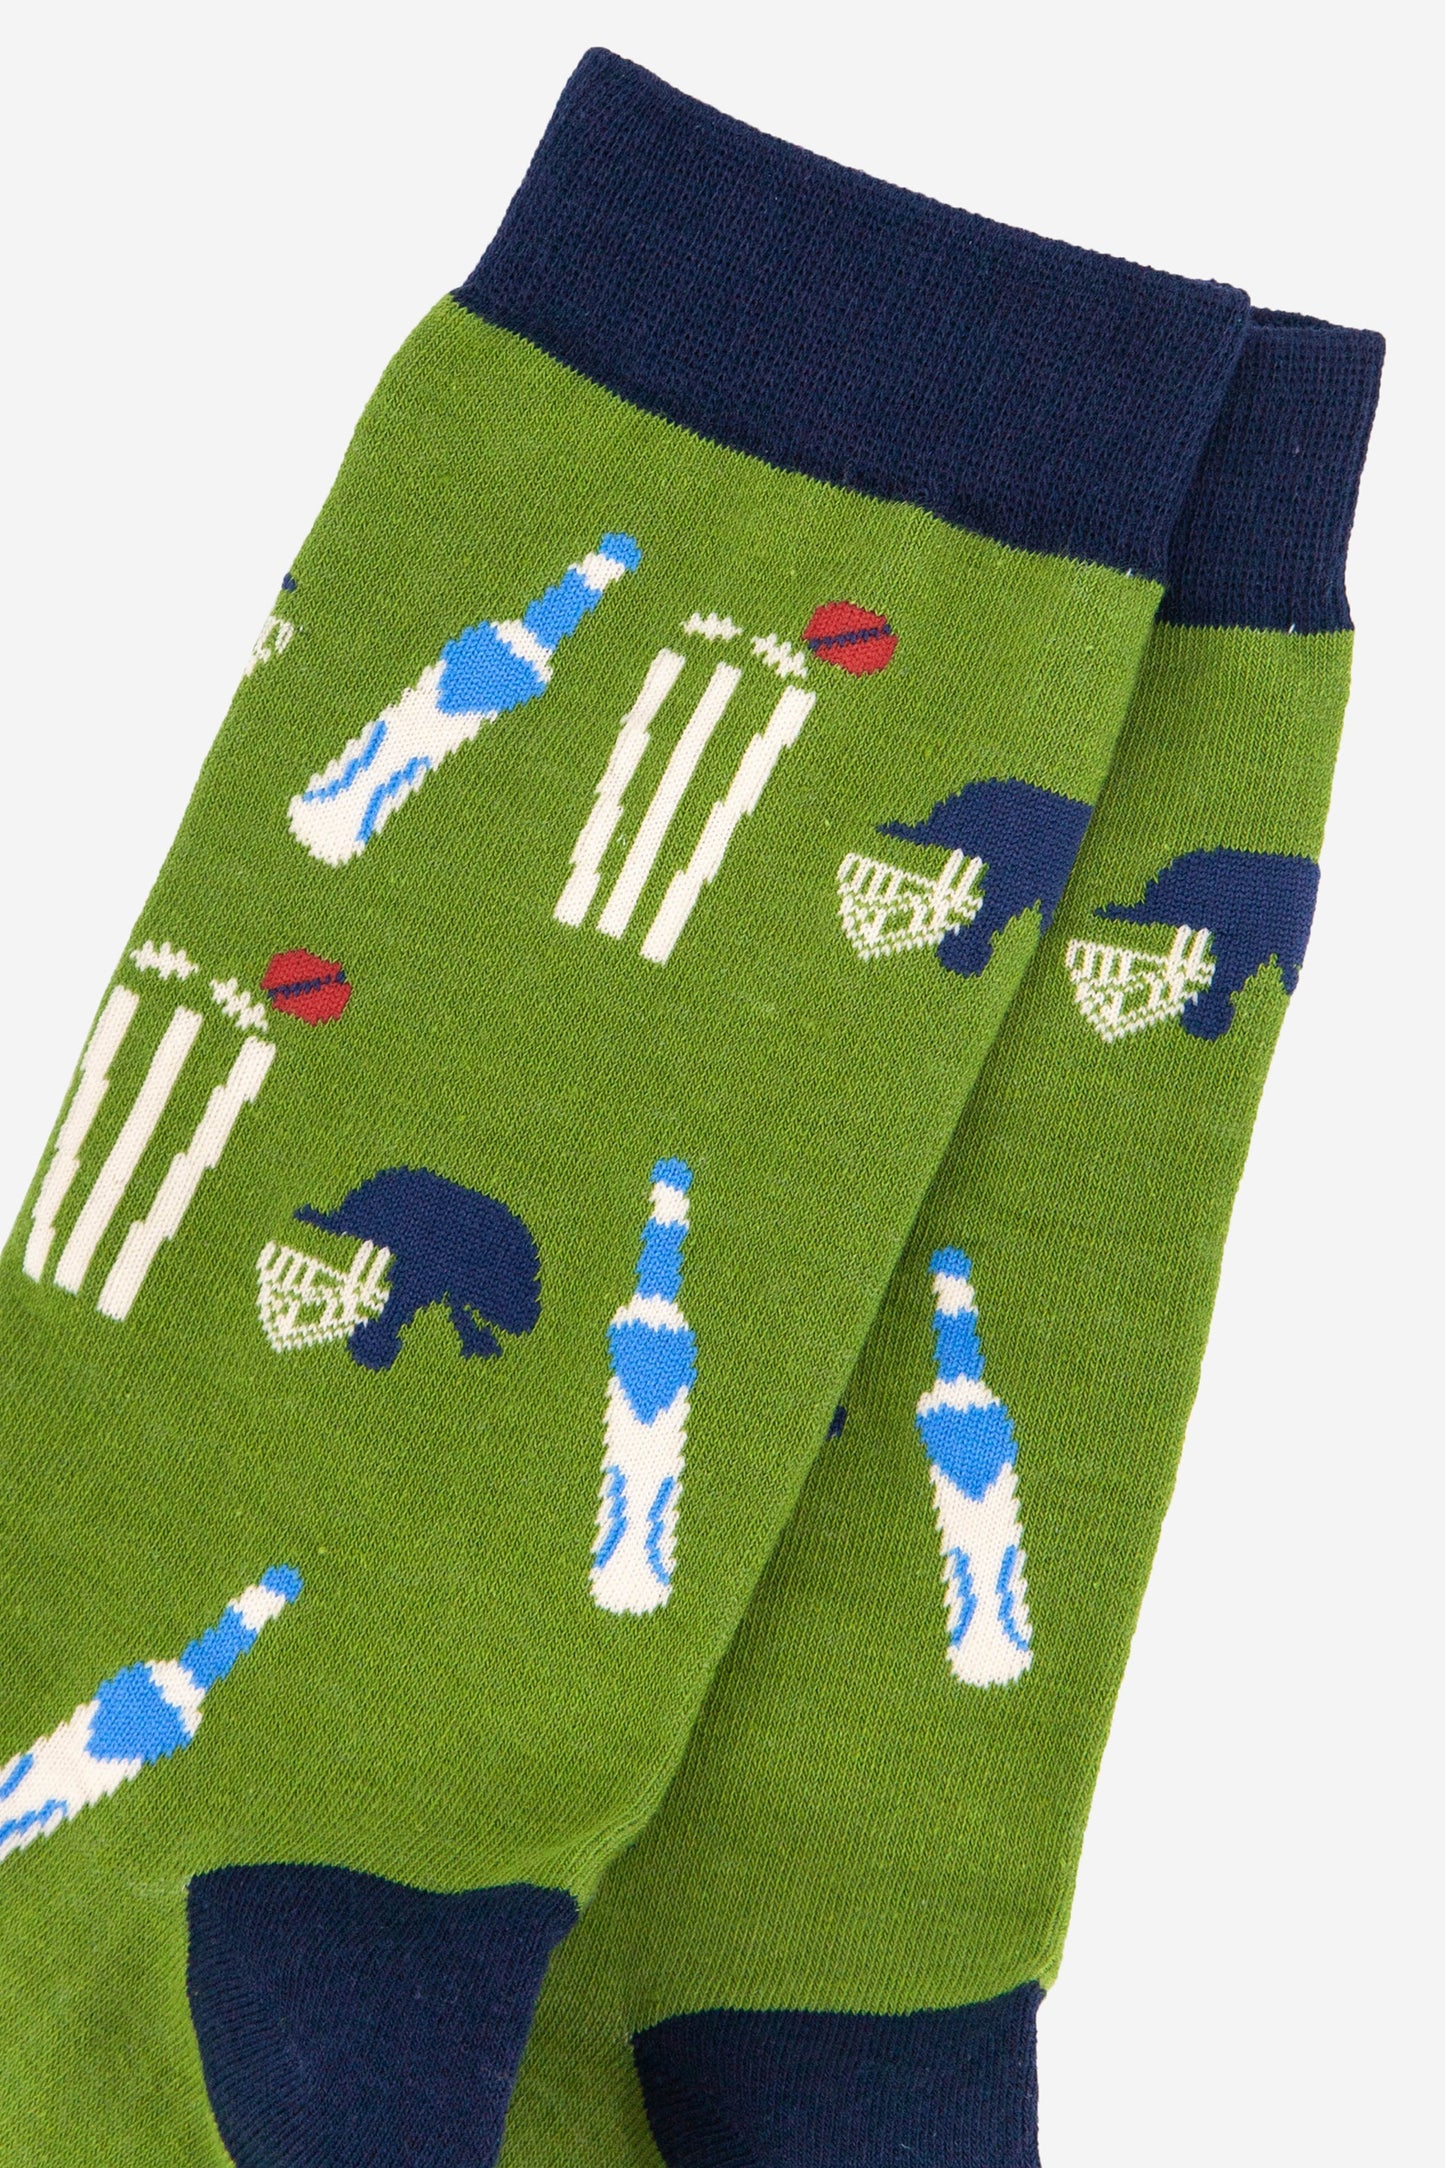 close up of the cricket kit pattern on the green bamboo socks, showing a cricket bat, stumps, ball and helmet